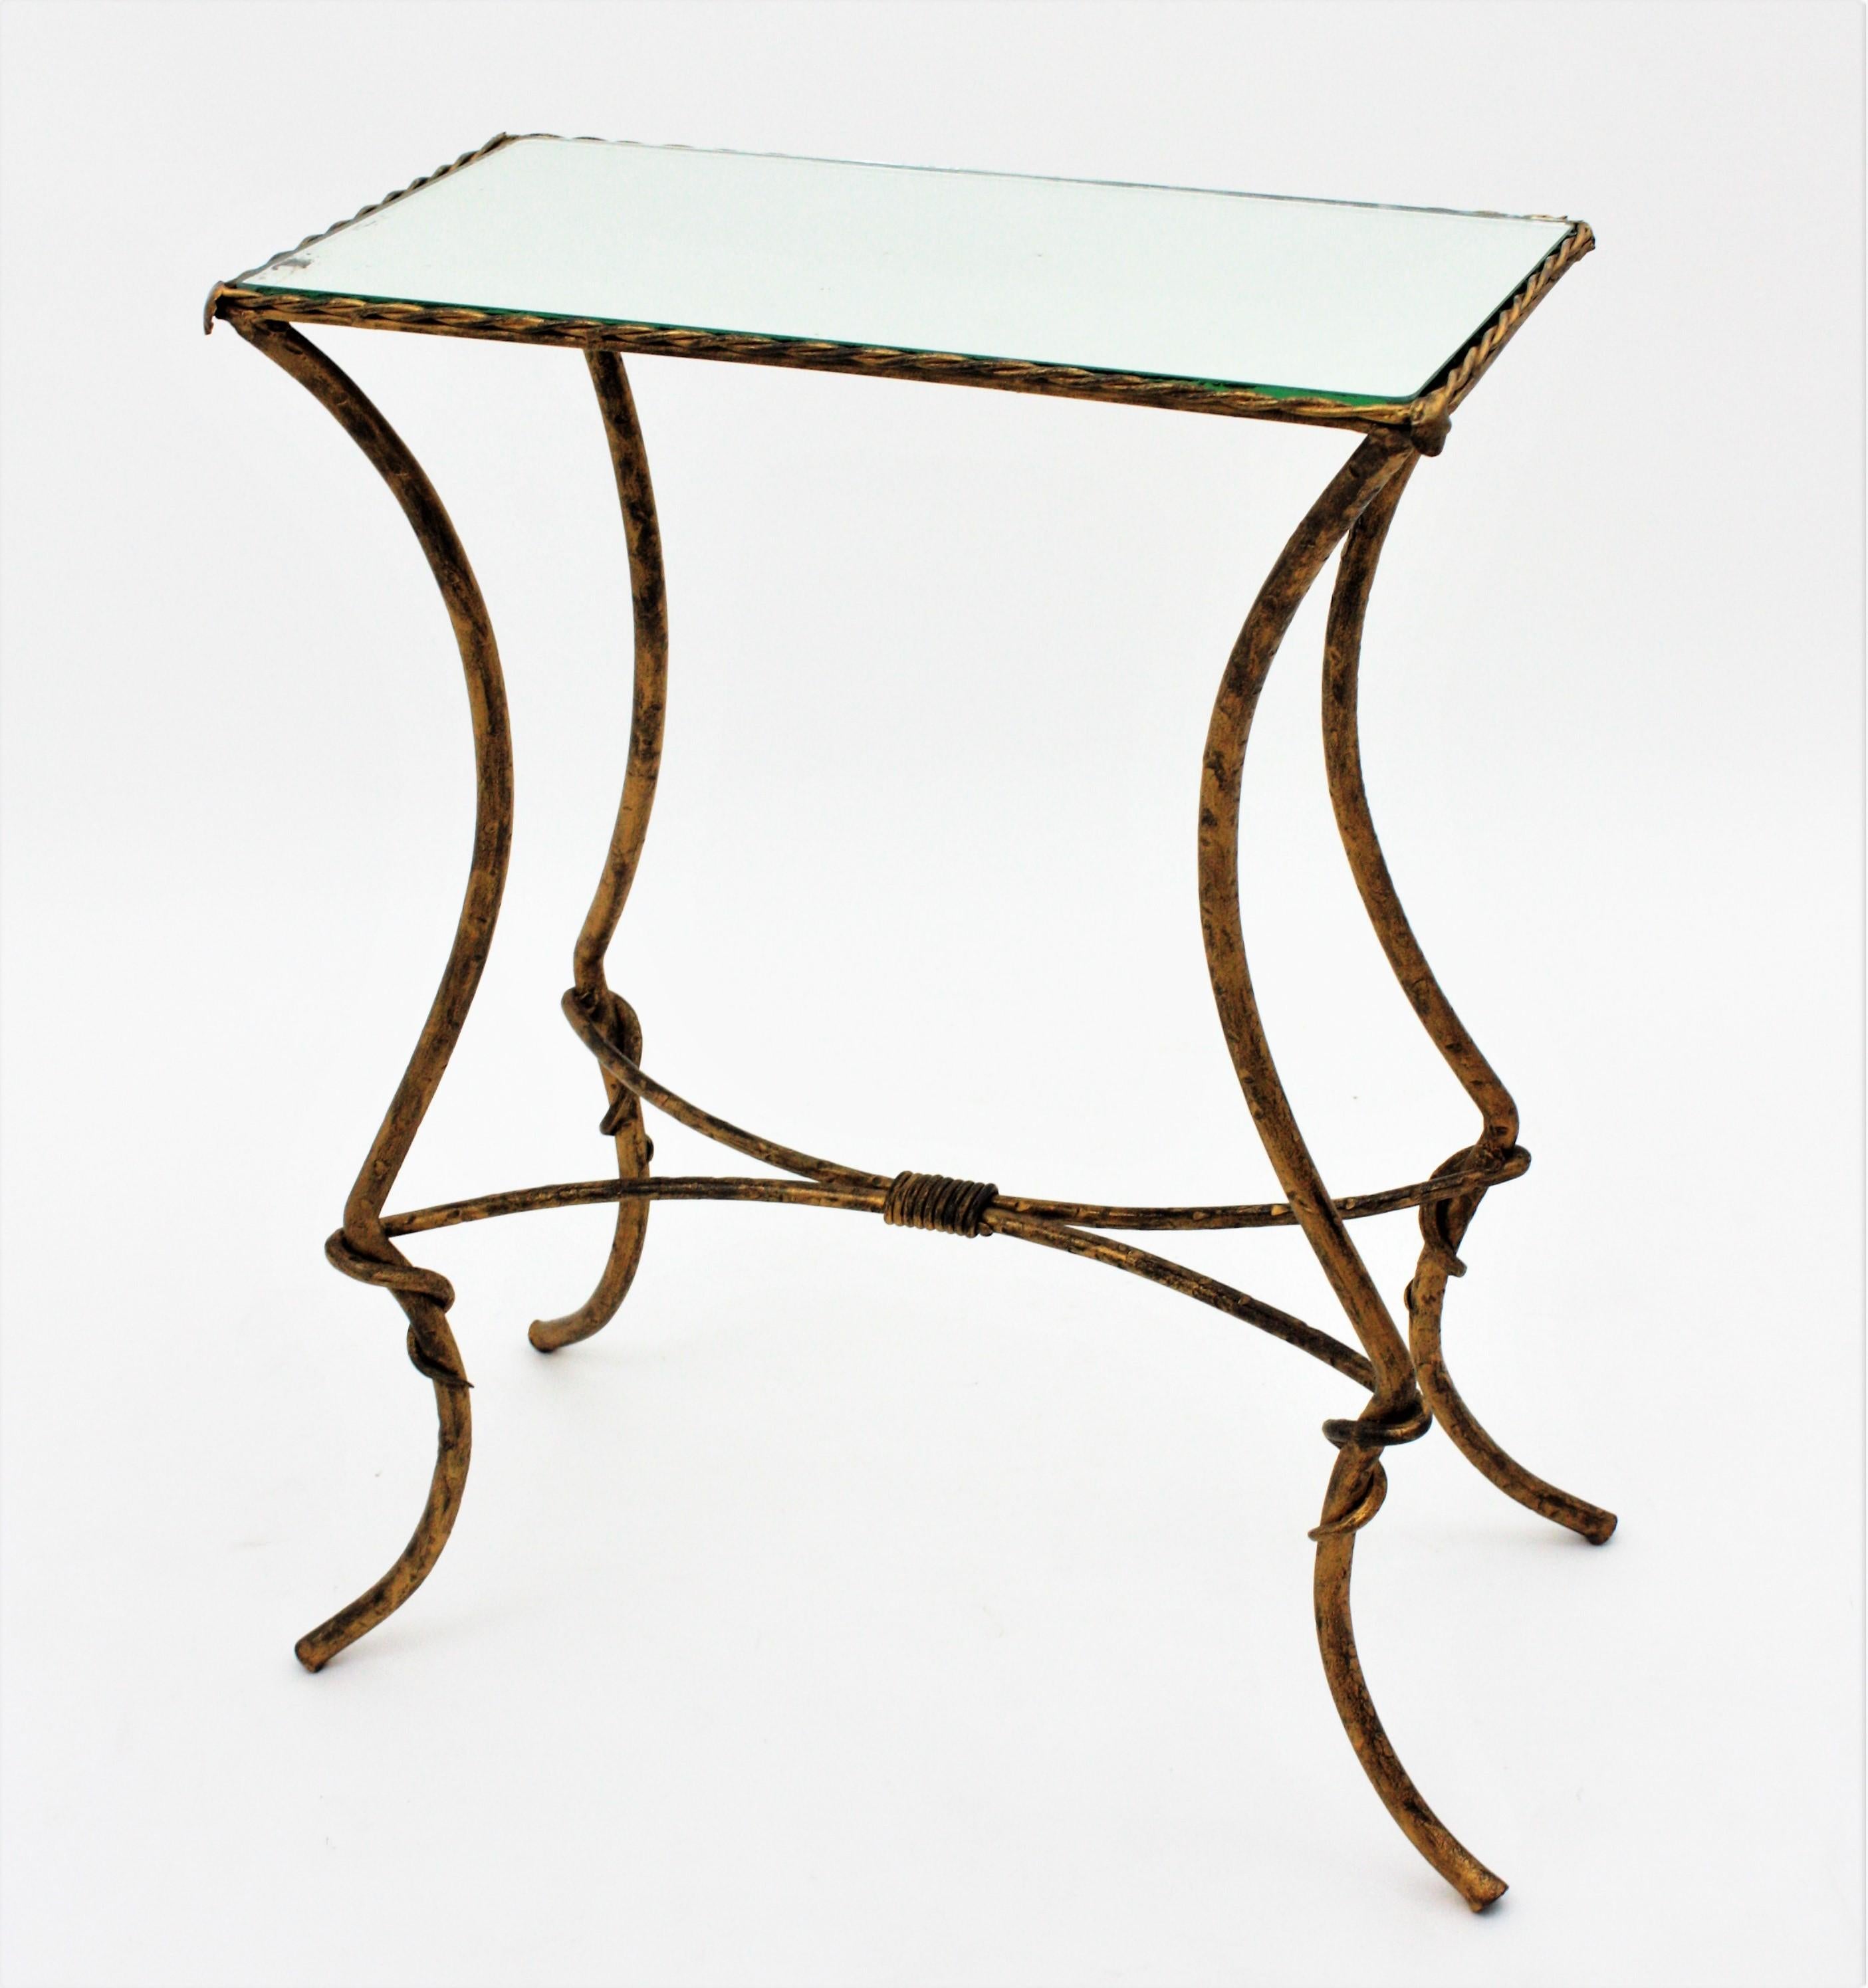 20th Century Maison Baguès Style Drinks Table in Gilt Wrought Iron with Mirror Top